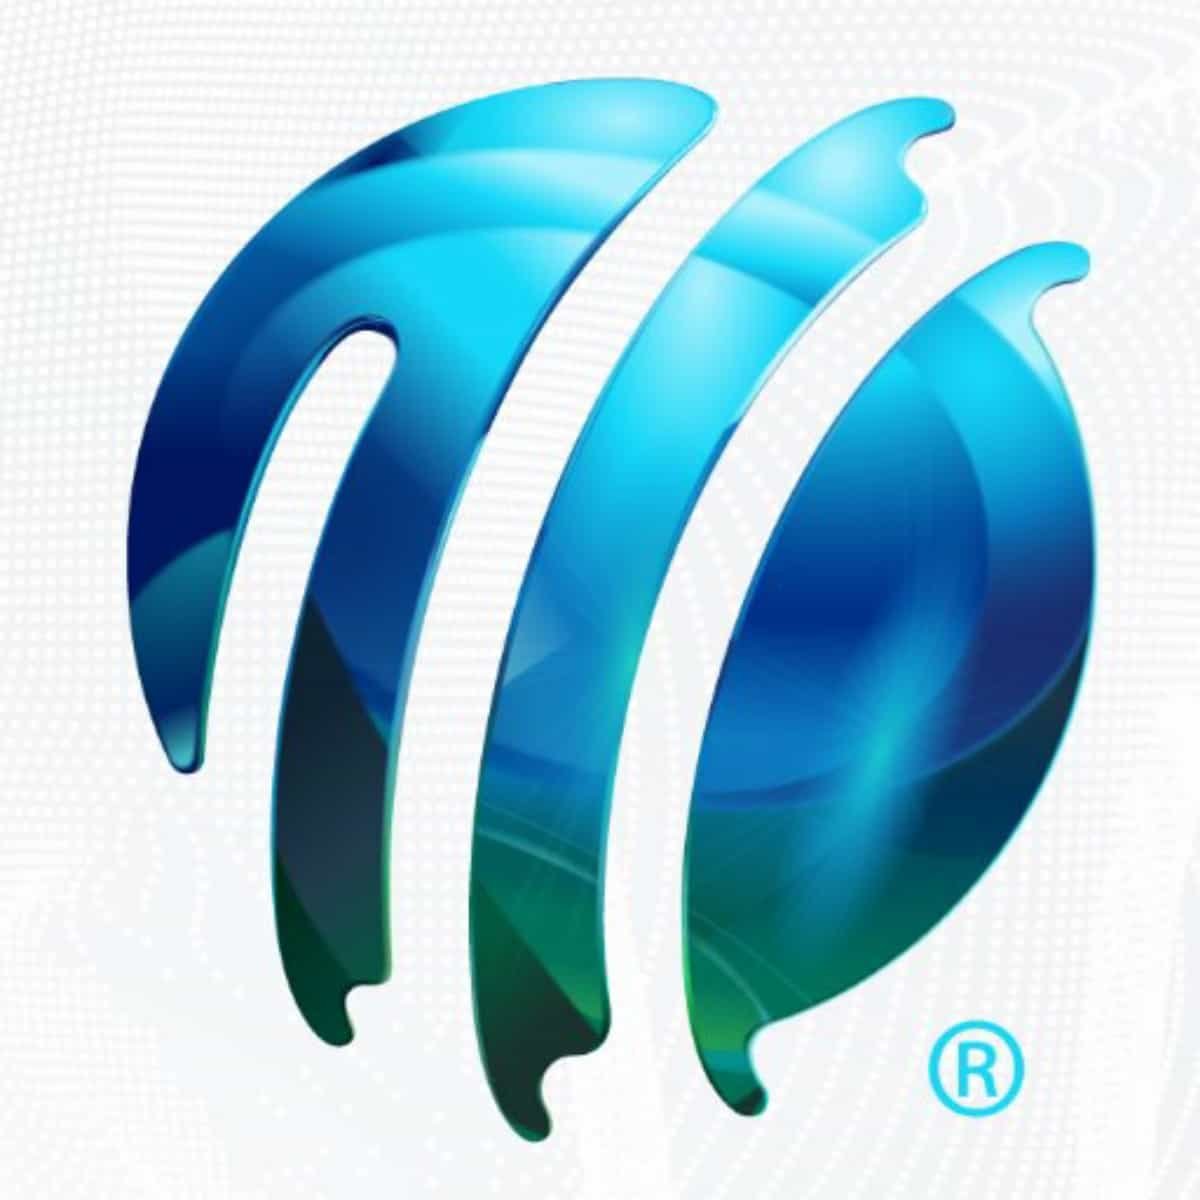 ICC suspends Women's World Cup and Men's U-19 WC qualifiers due to Covid-19